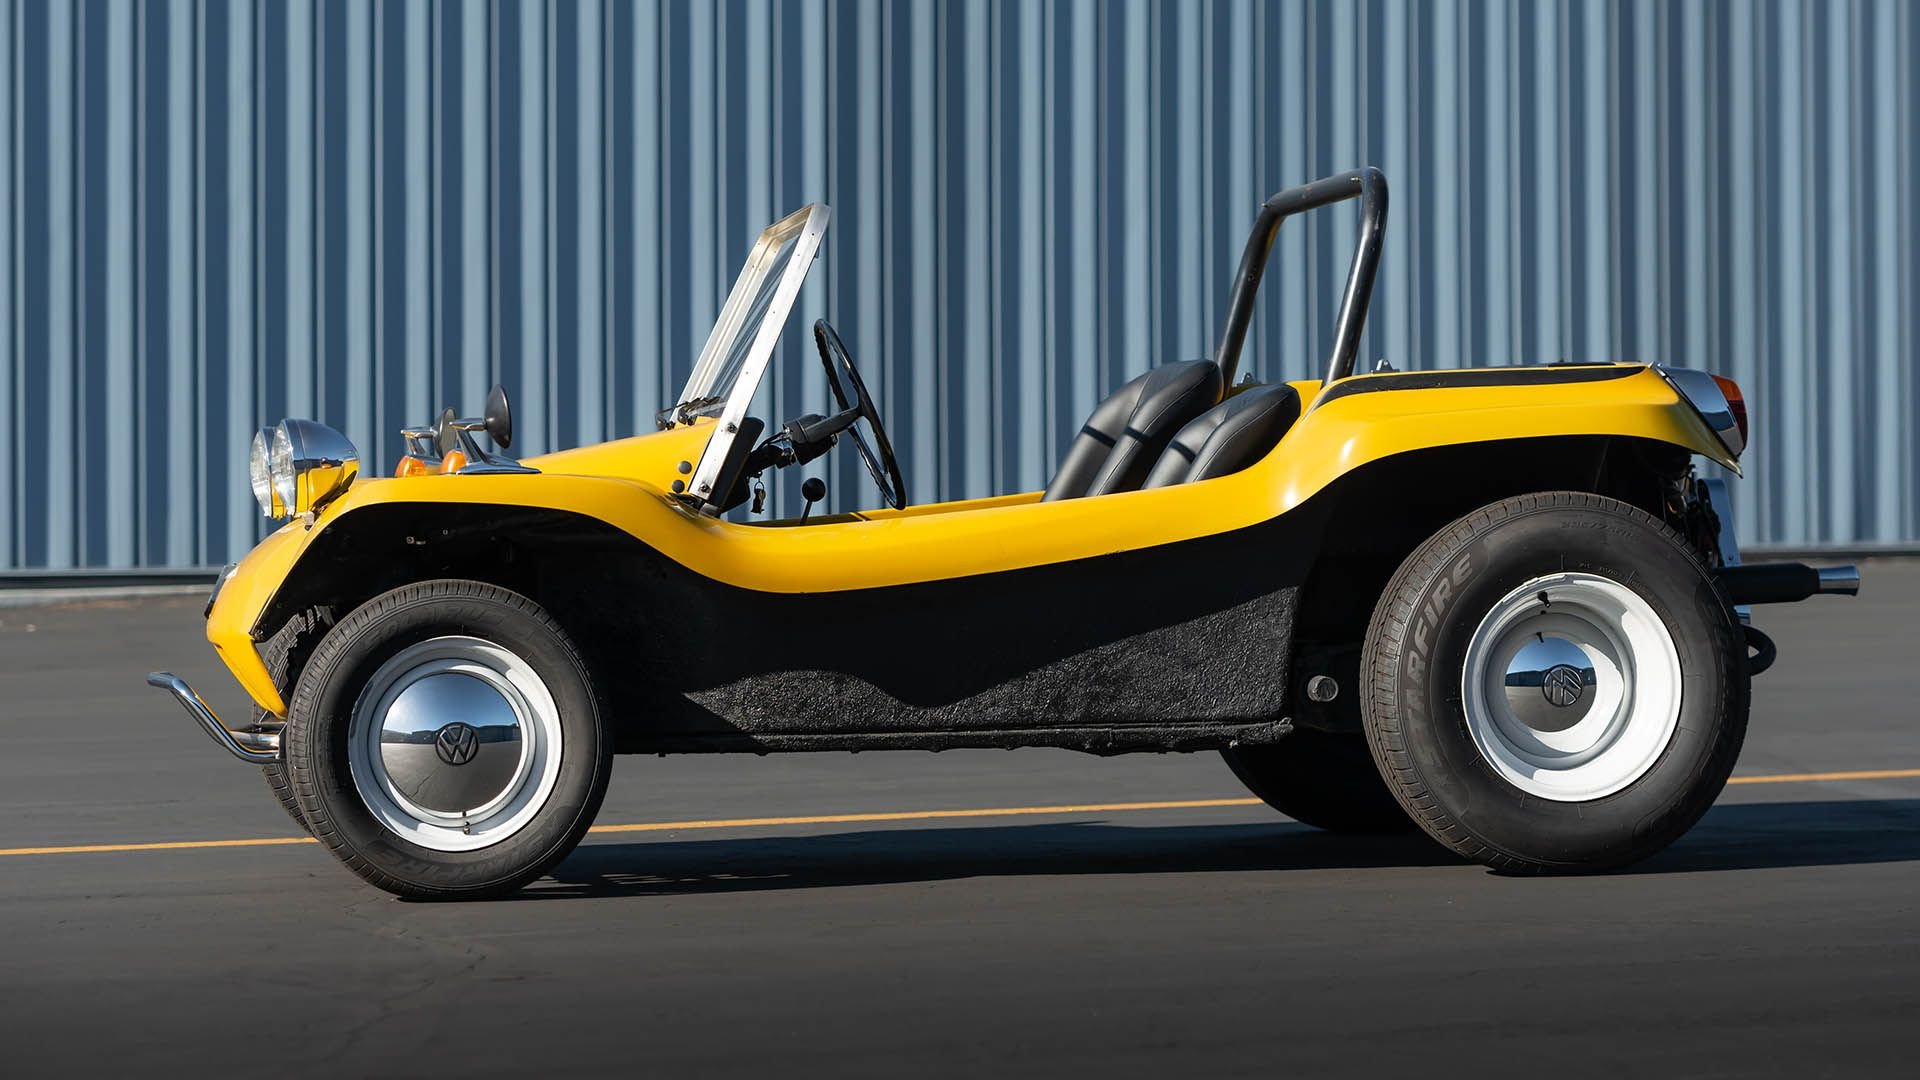 For Sale 1968 Meyers Manx 